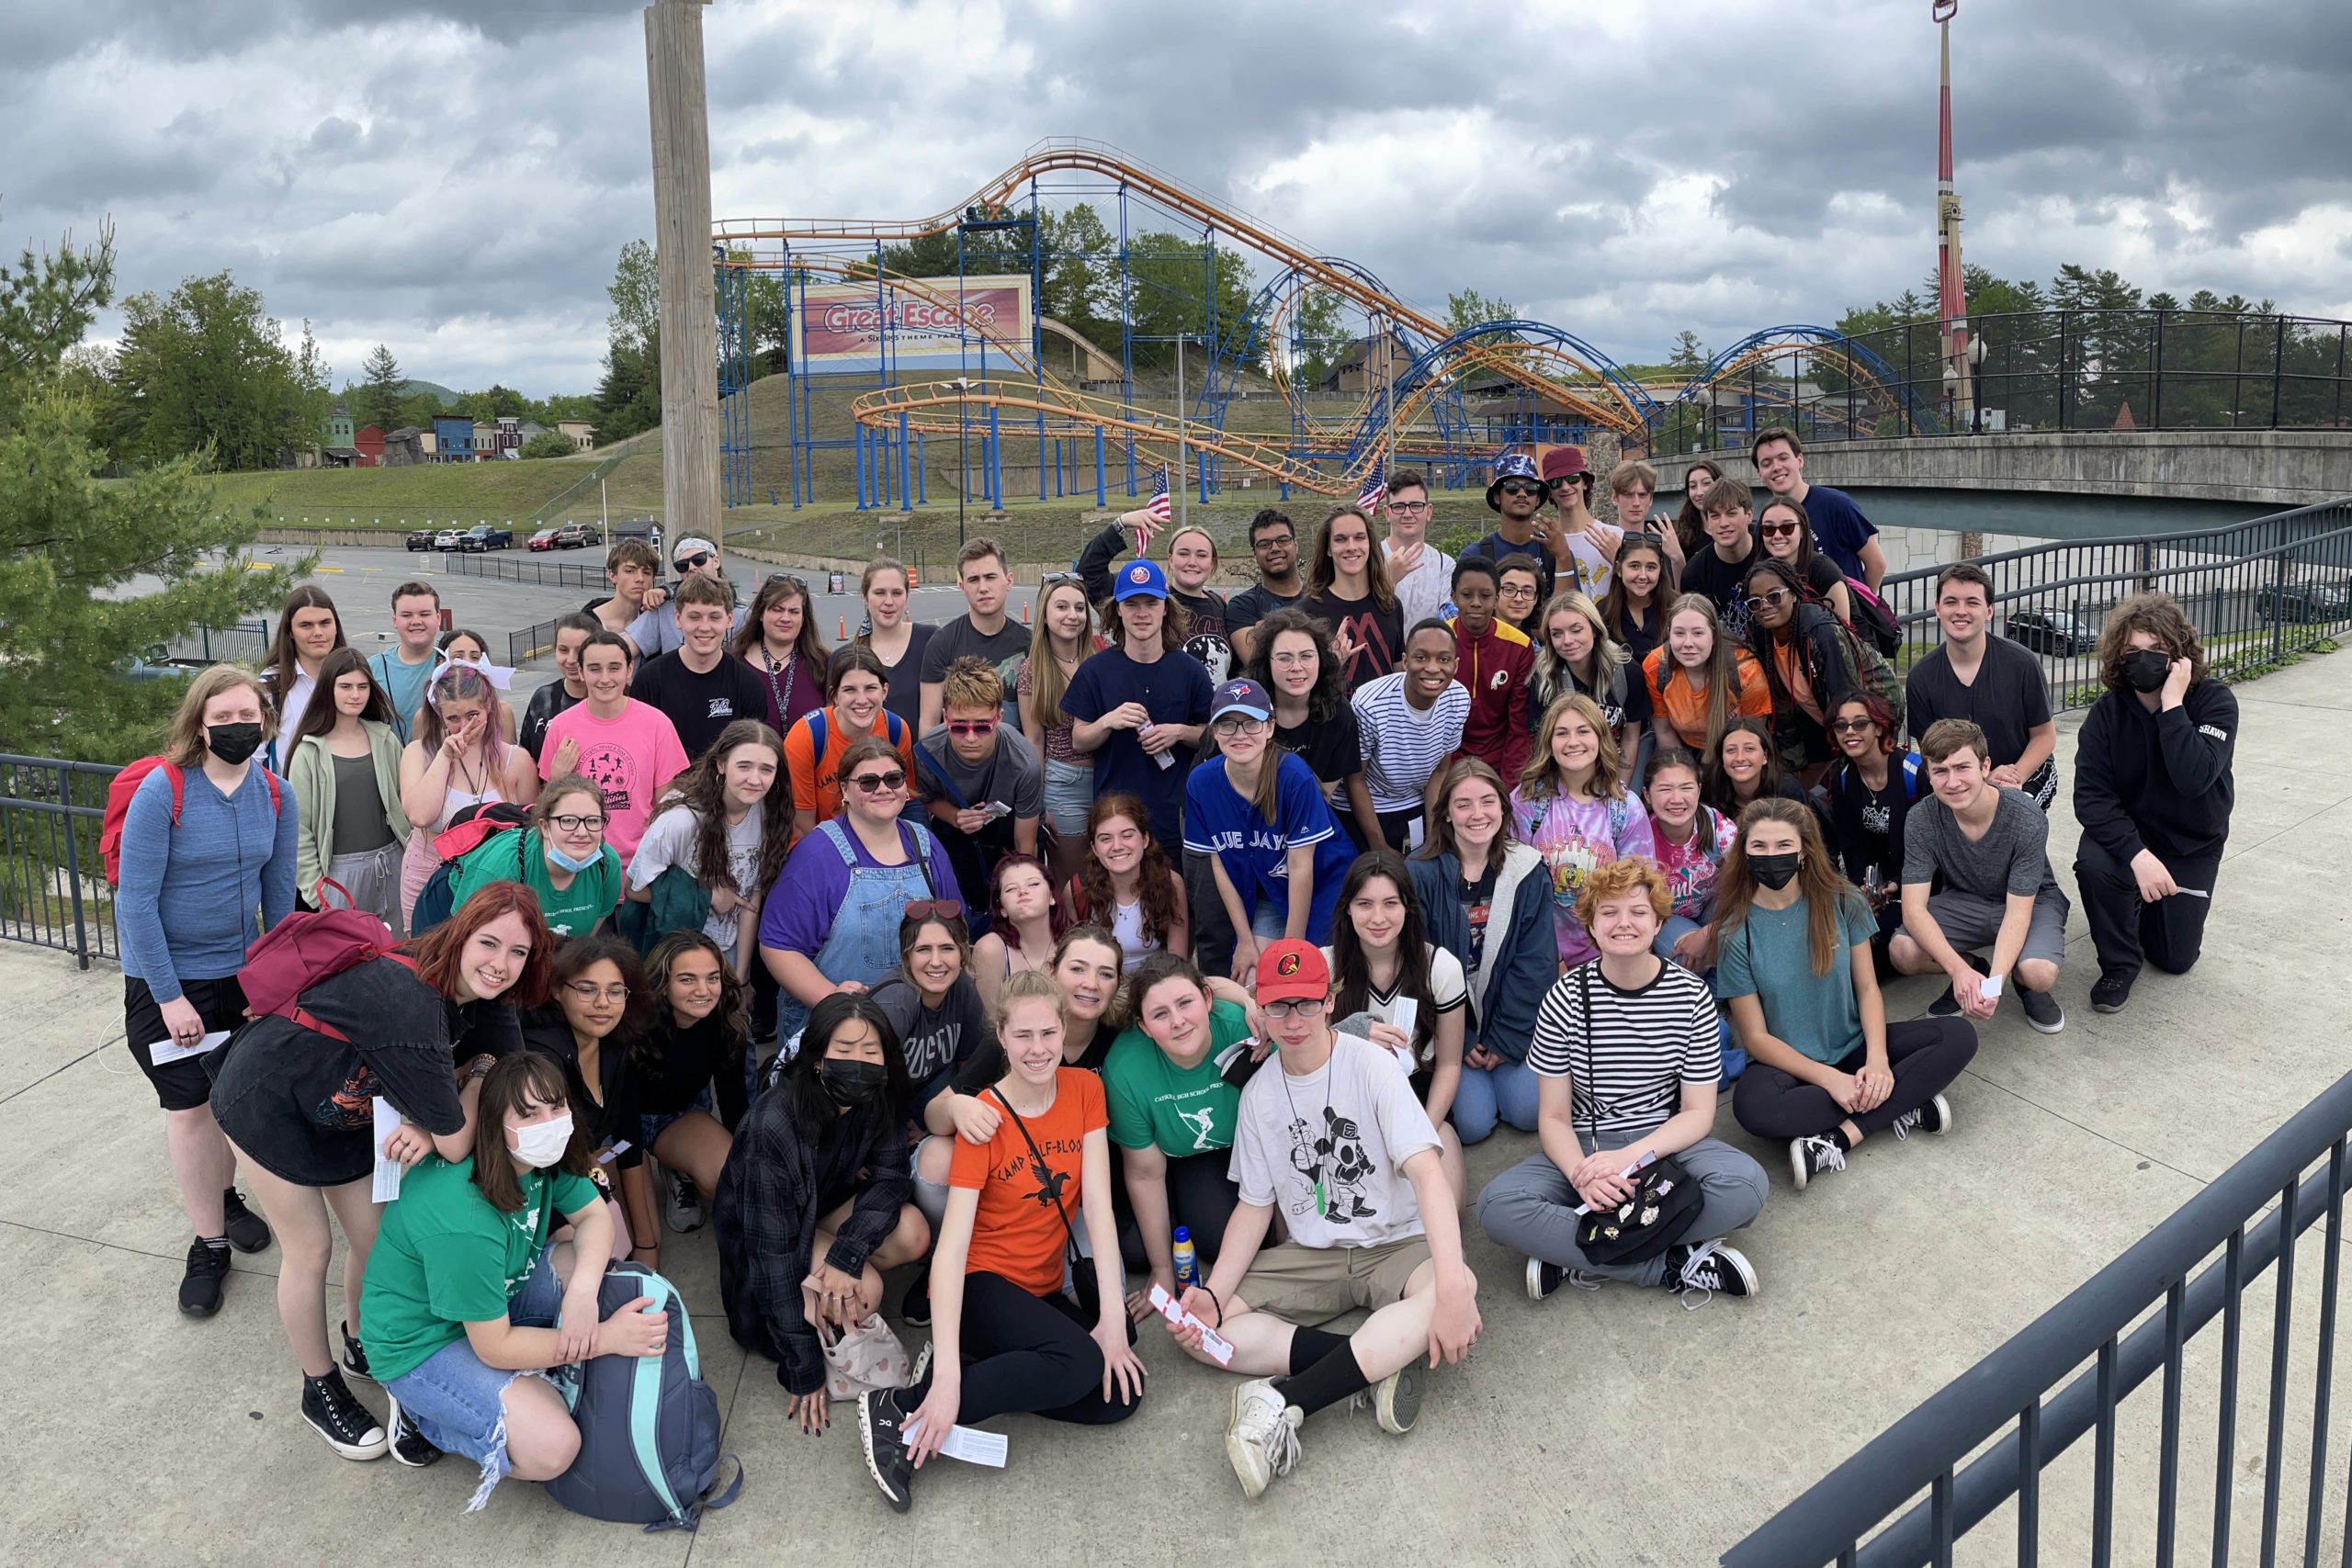 CHS music students at Great Escape them park